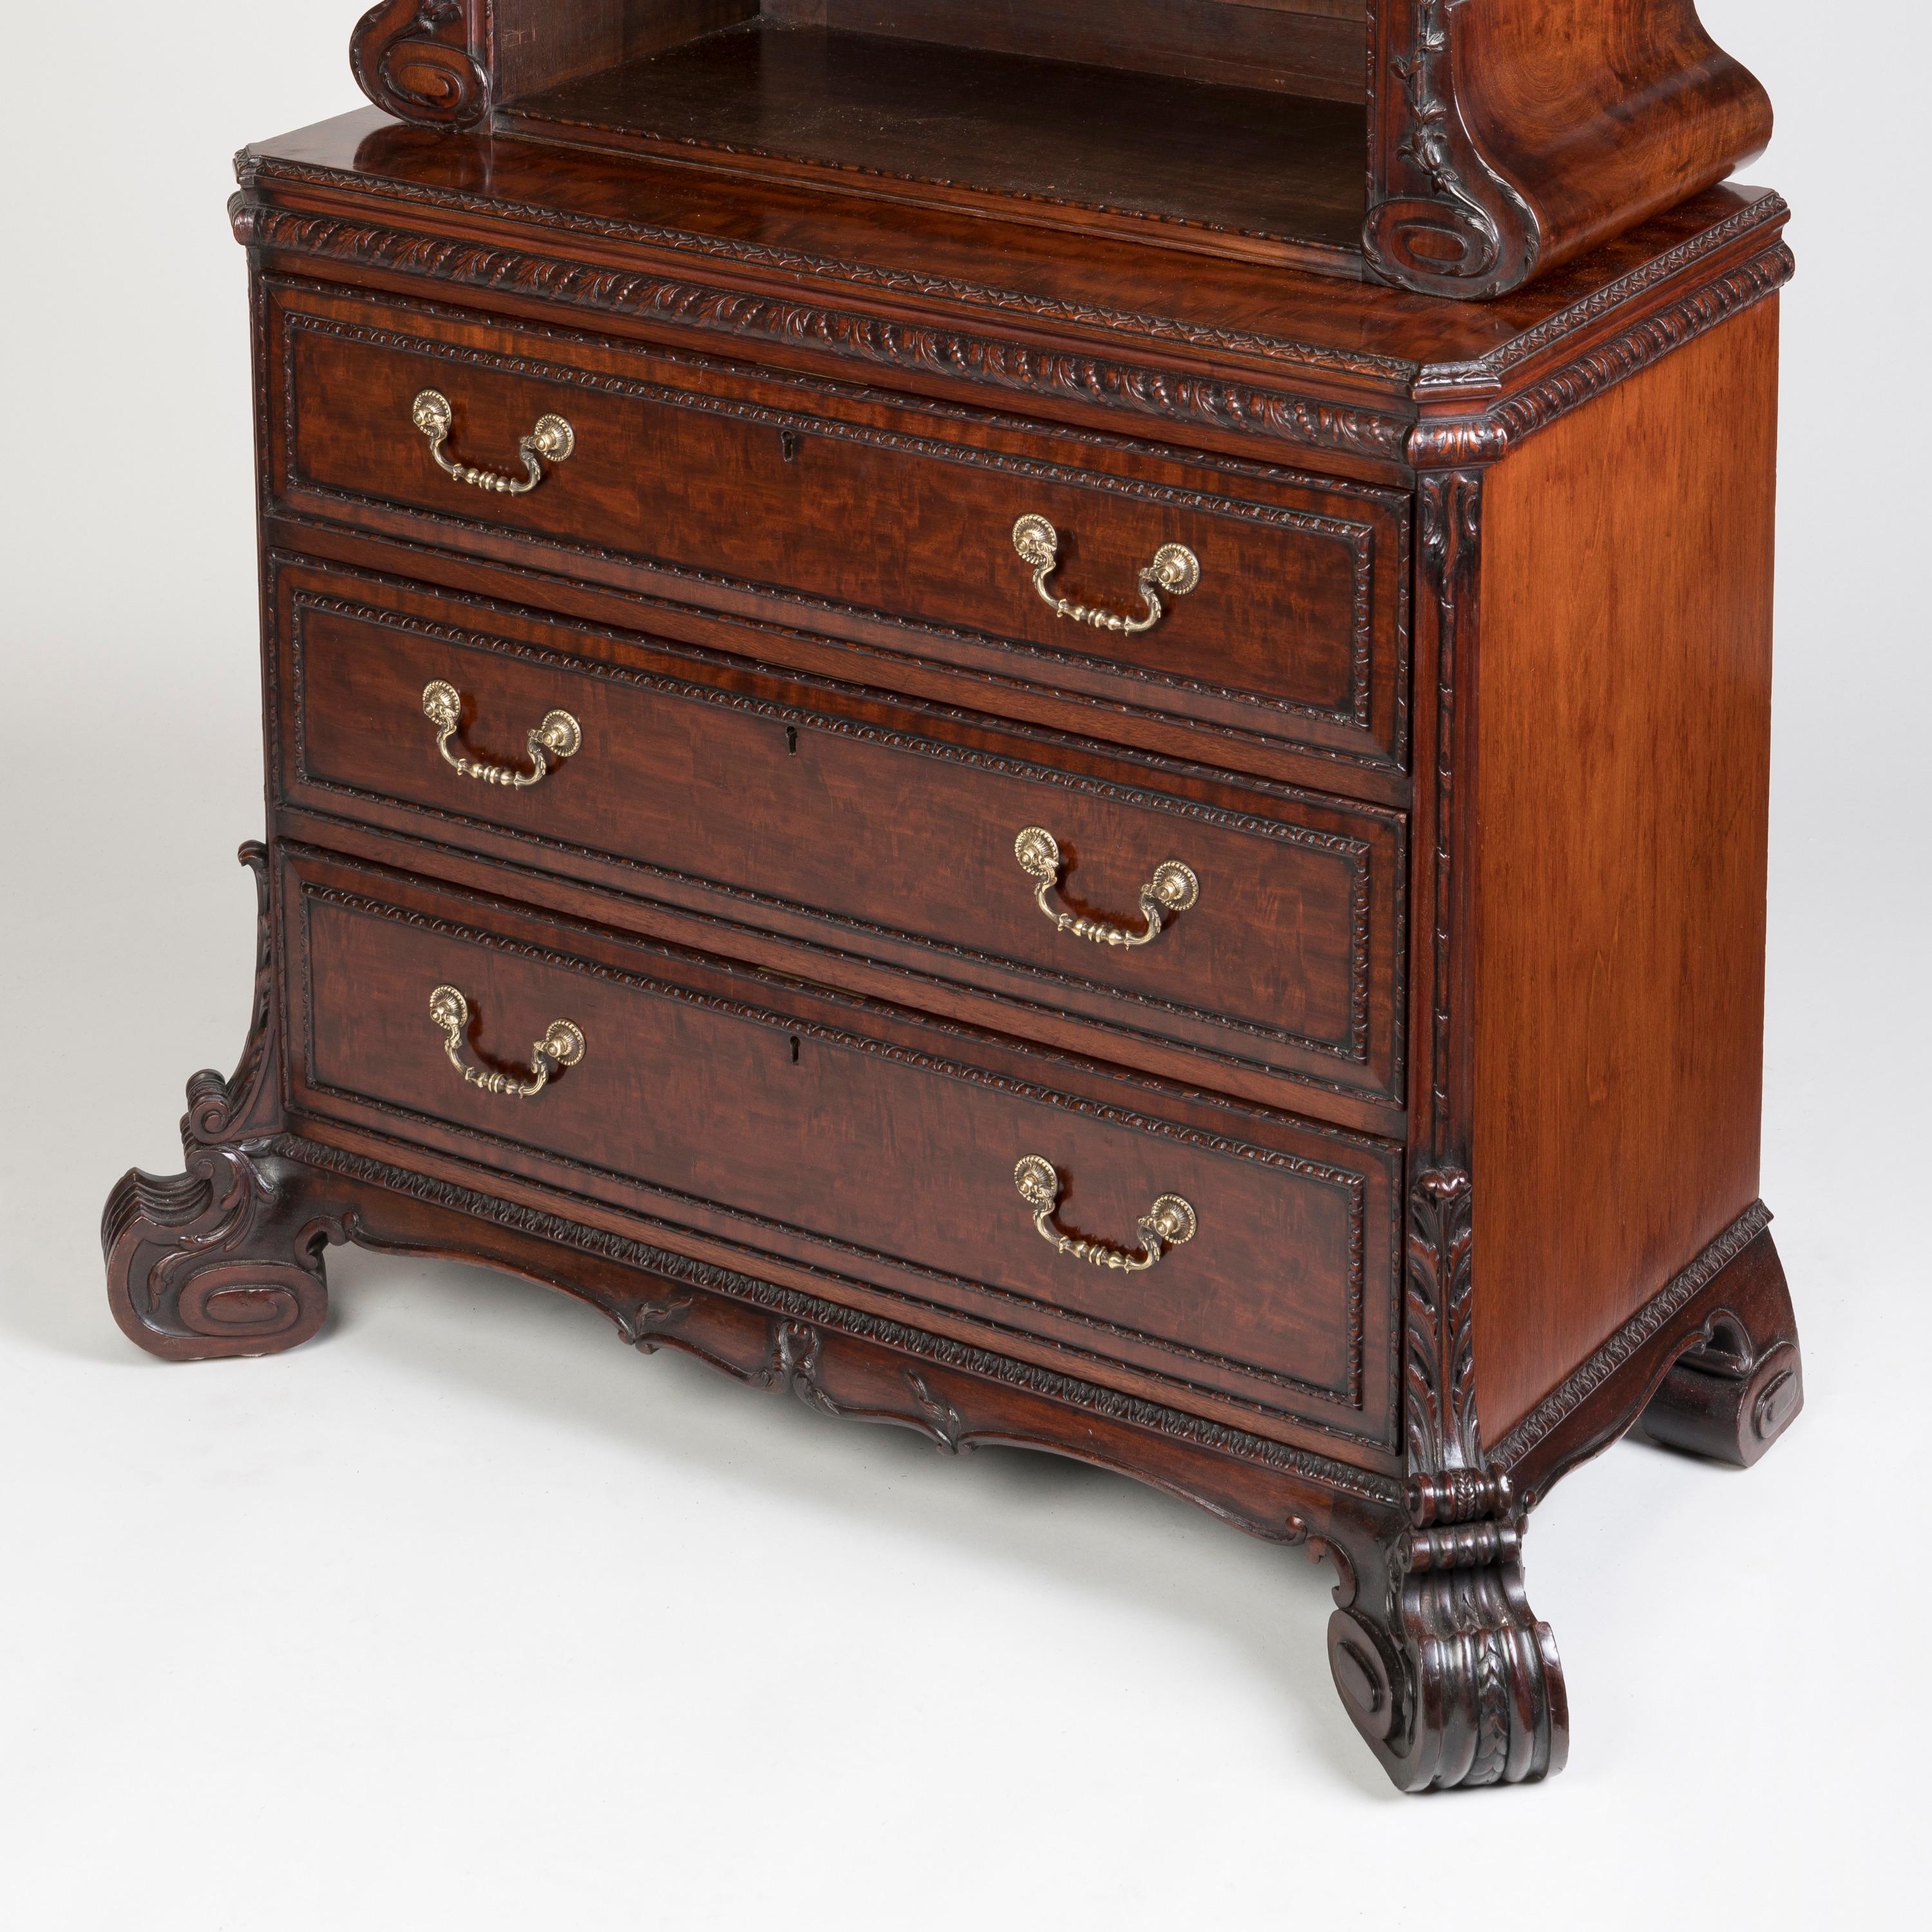 English 19th Century Carved Mahogany Cabinet Bookcase by H. Samuel in the Georgian Style For Sale